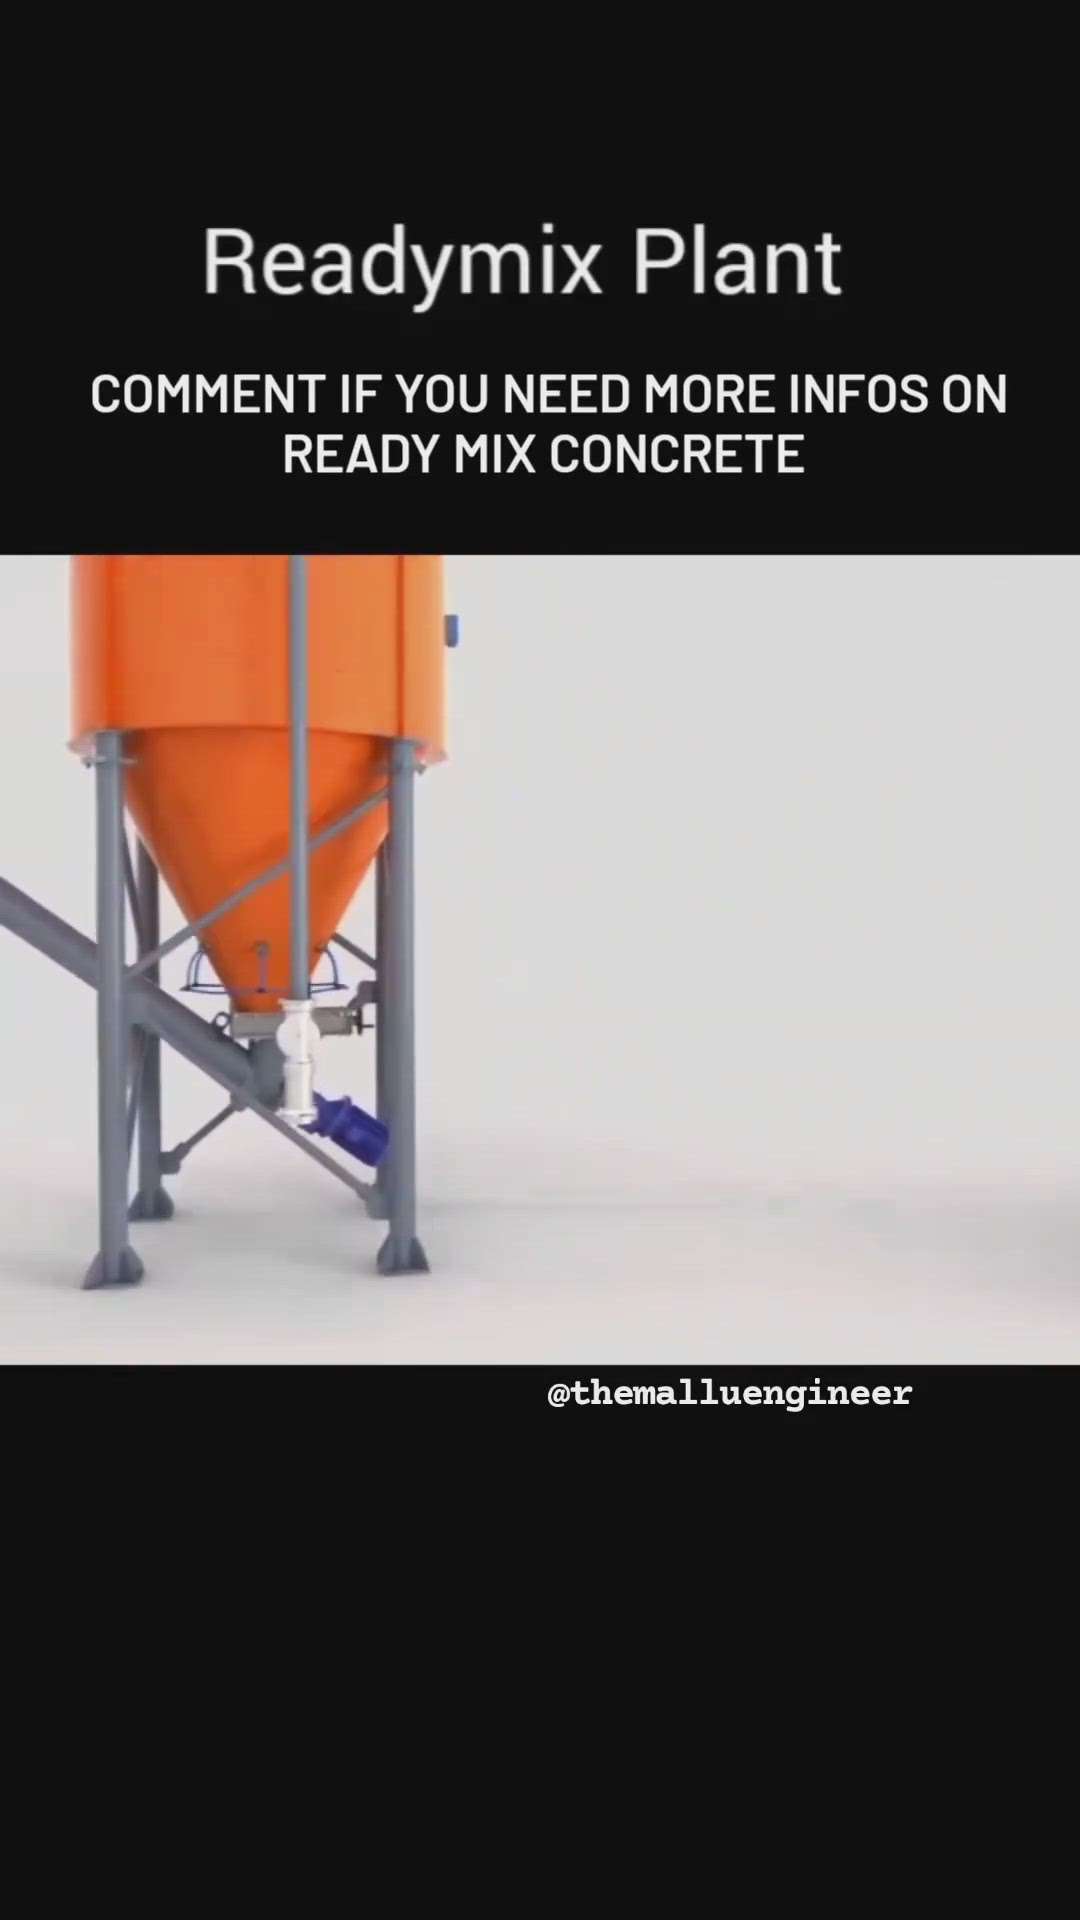 Comment your suggestions ... share and follow if you like the video.

It is made with a mix of Portland cement, water, and aggregates such as sand, gravel, or crushed stone. Considering technological aspects, the RMC is advanced when compared to site mixed concrete. RMC has a lot of benefits such as quality, speed, life-cycle cost, and environmental friendliness.
Ready mixed concrete is a customized product that is manufactured to meet customer needs and specifications. This type of concrete is created in specialized batching plants and is mixed professionally to ensure customers receive the optimal blend that'll help bring their project smoothly to completion.

Disadvantages of Ready Mixed Concrete:

Transit time might from the time of preparation of concrete on the distribution site, might affect the performance.
There is a need to add extra water or penetration to maintain functionality according to the specification.
On-site, quality assurance (QA) / quality control (Q   #concrete